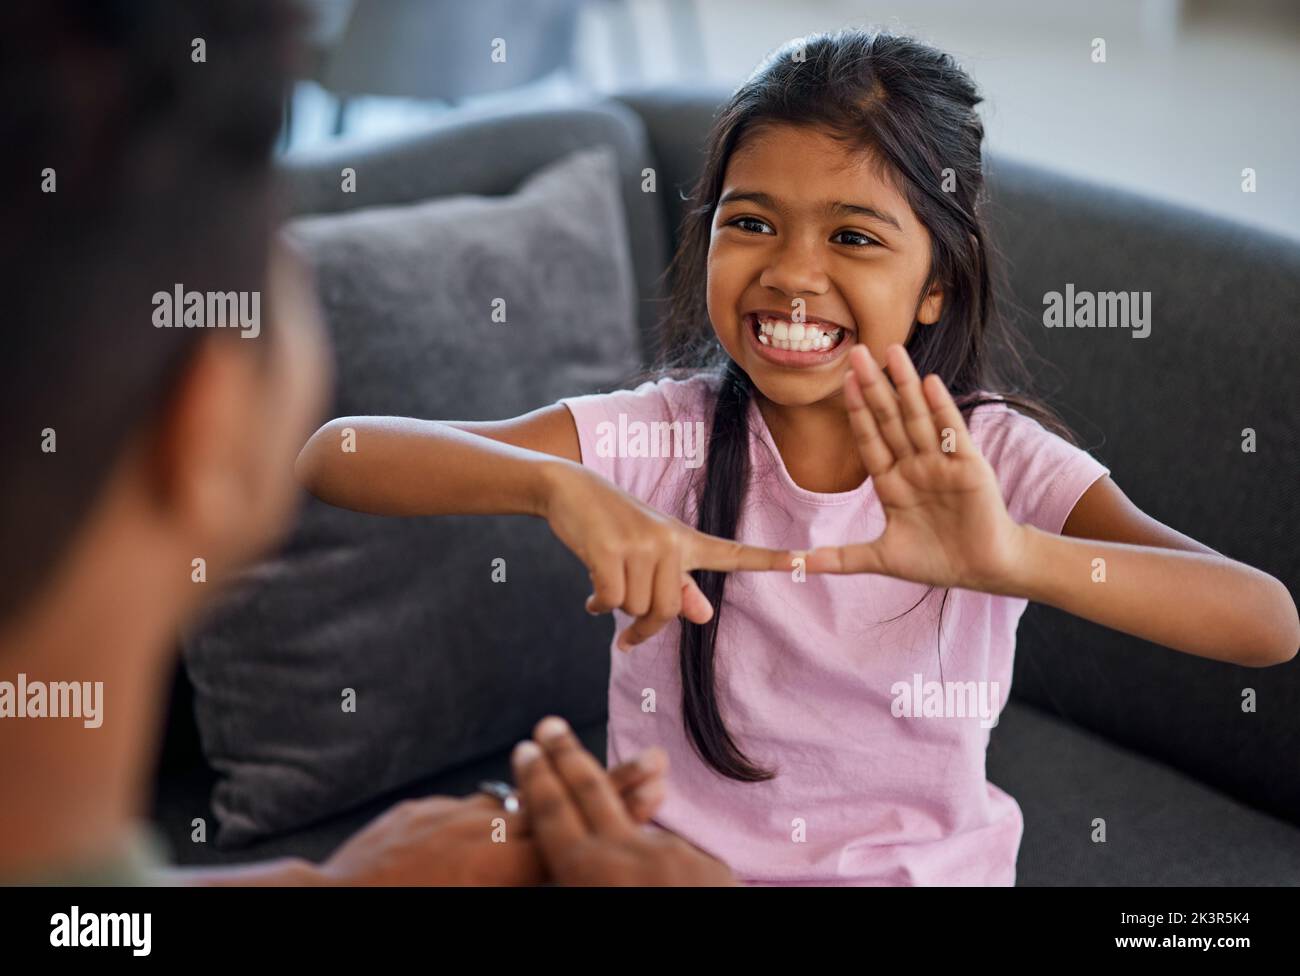 Child, sign language and learning to communicate with deaf girl or parent while making fingers and showing visual symbols at home. Happy kid with Stock Photo